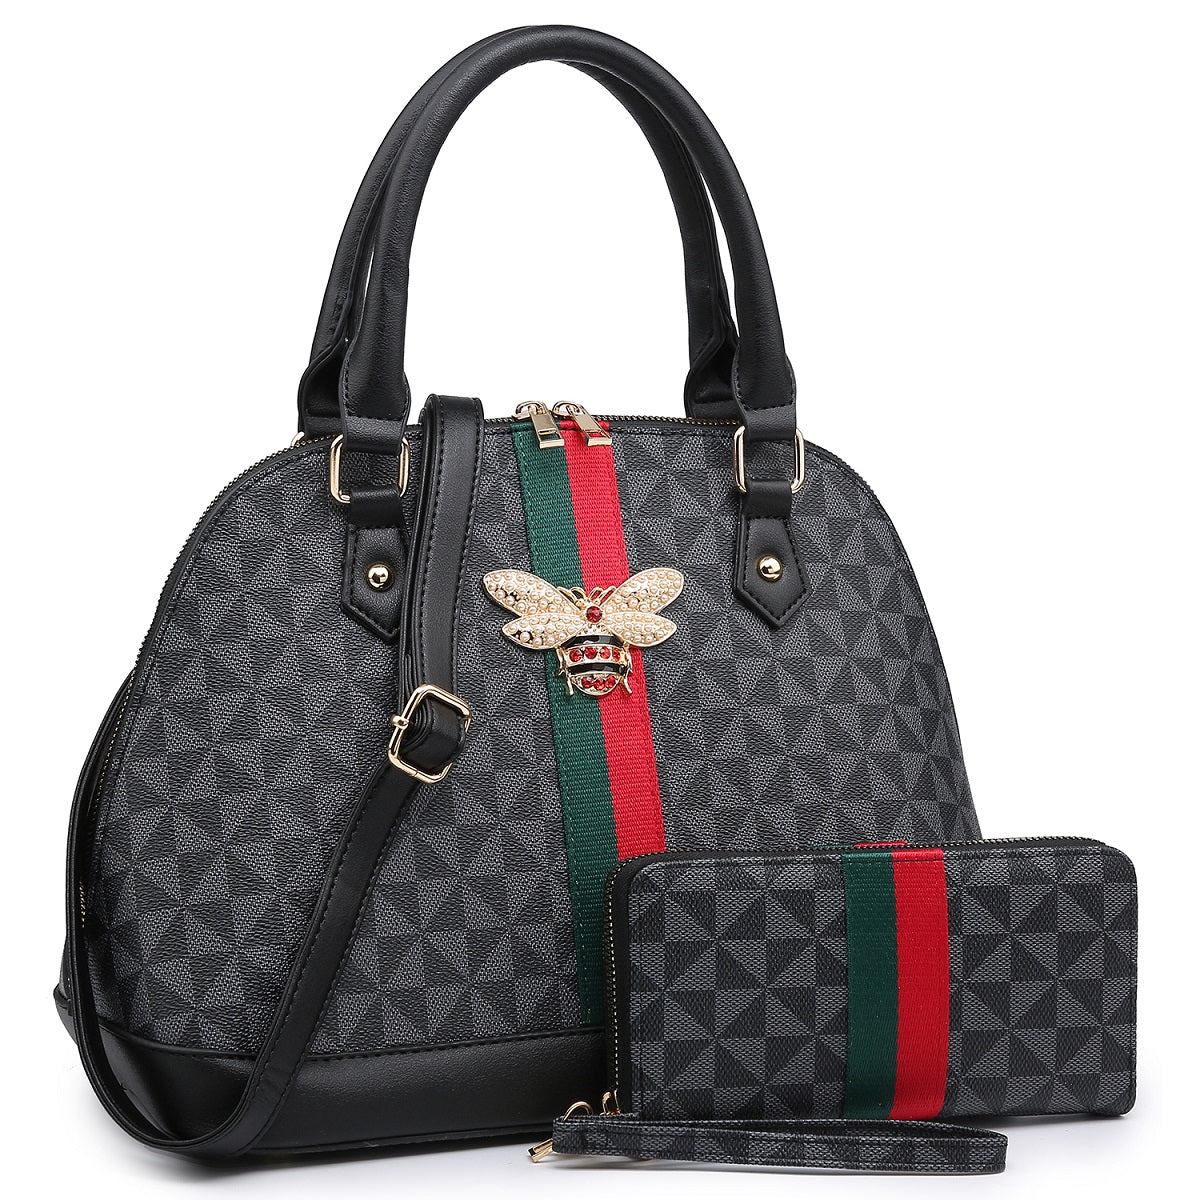 Most Popular Gucci Bags of All Time | Top Gucci Bags | Diamond Banc